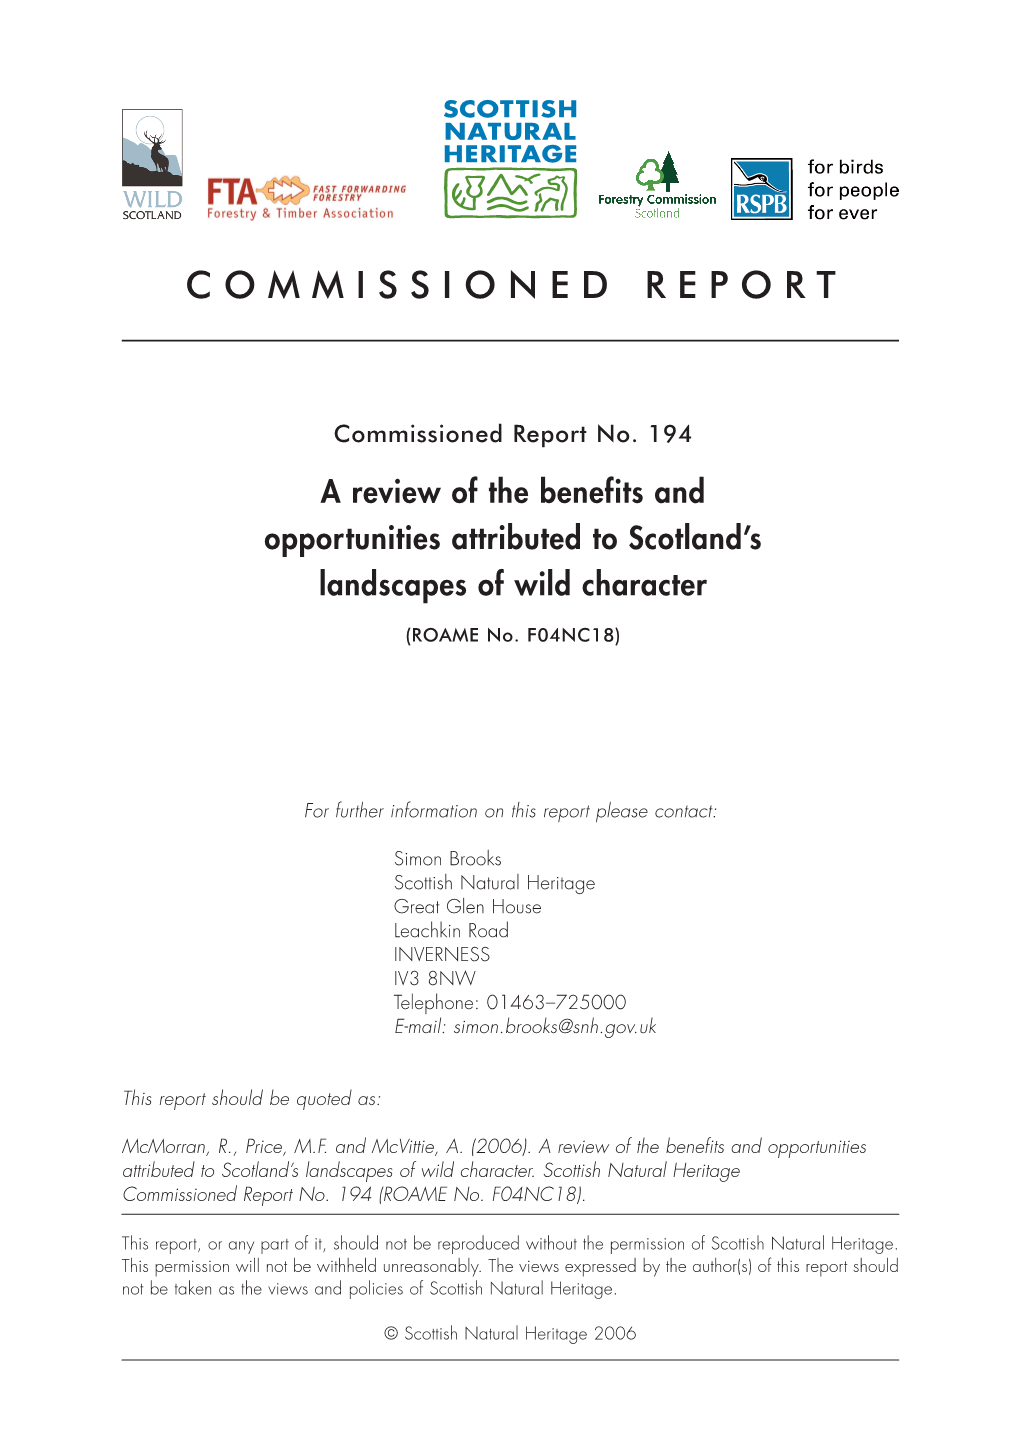 SNH Commissioned Report 194: a Review of the Benefits And